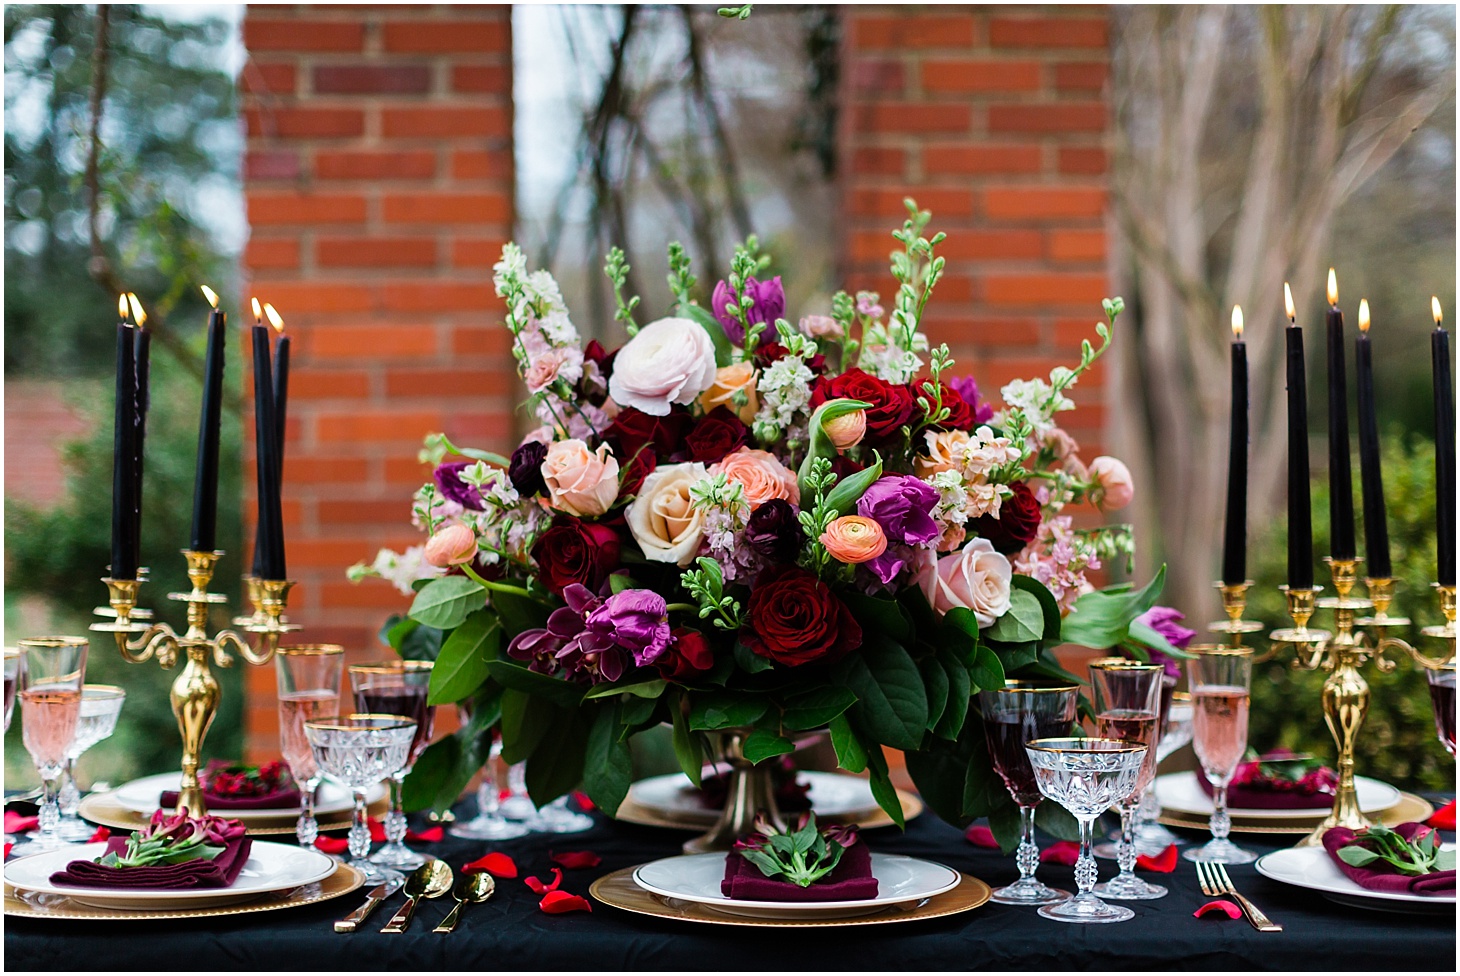 Wedding Details at River Farm in Alexandria, VA | Black and Red Gothic-Inspired Wedding Editorial | Sarah Bradshaw Photography